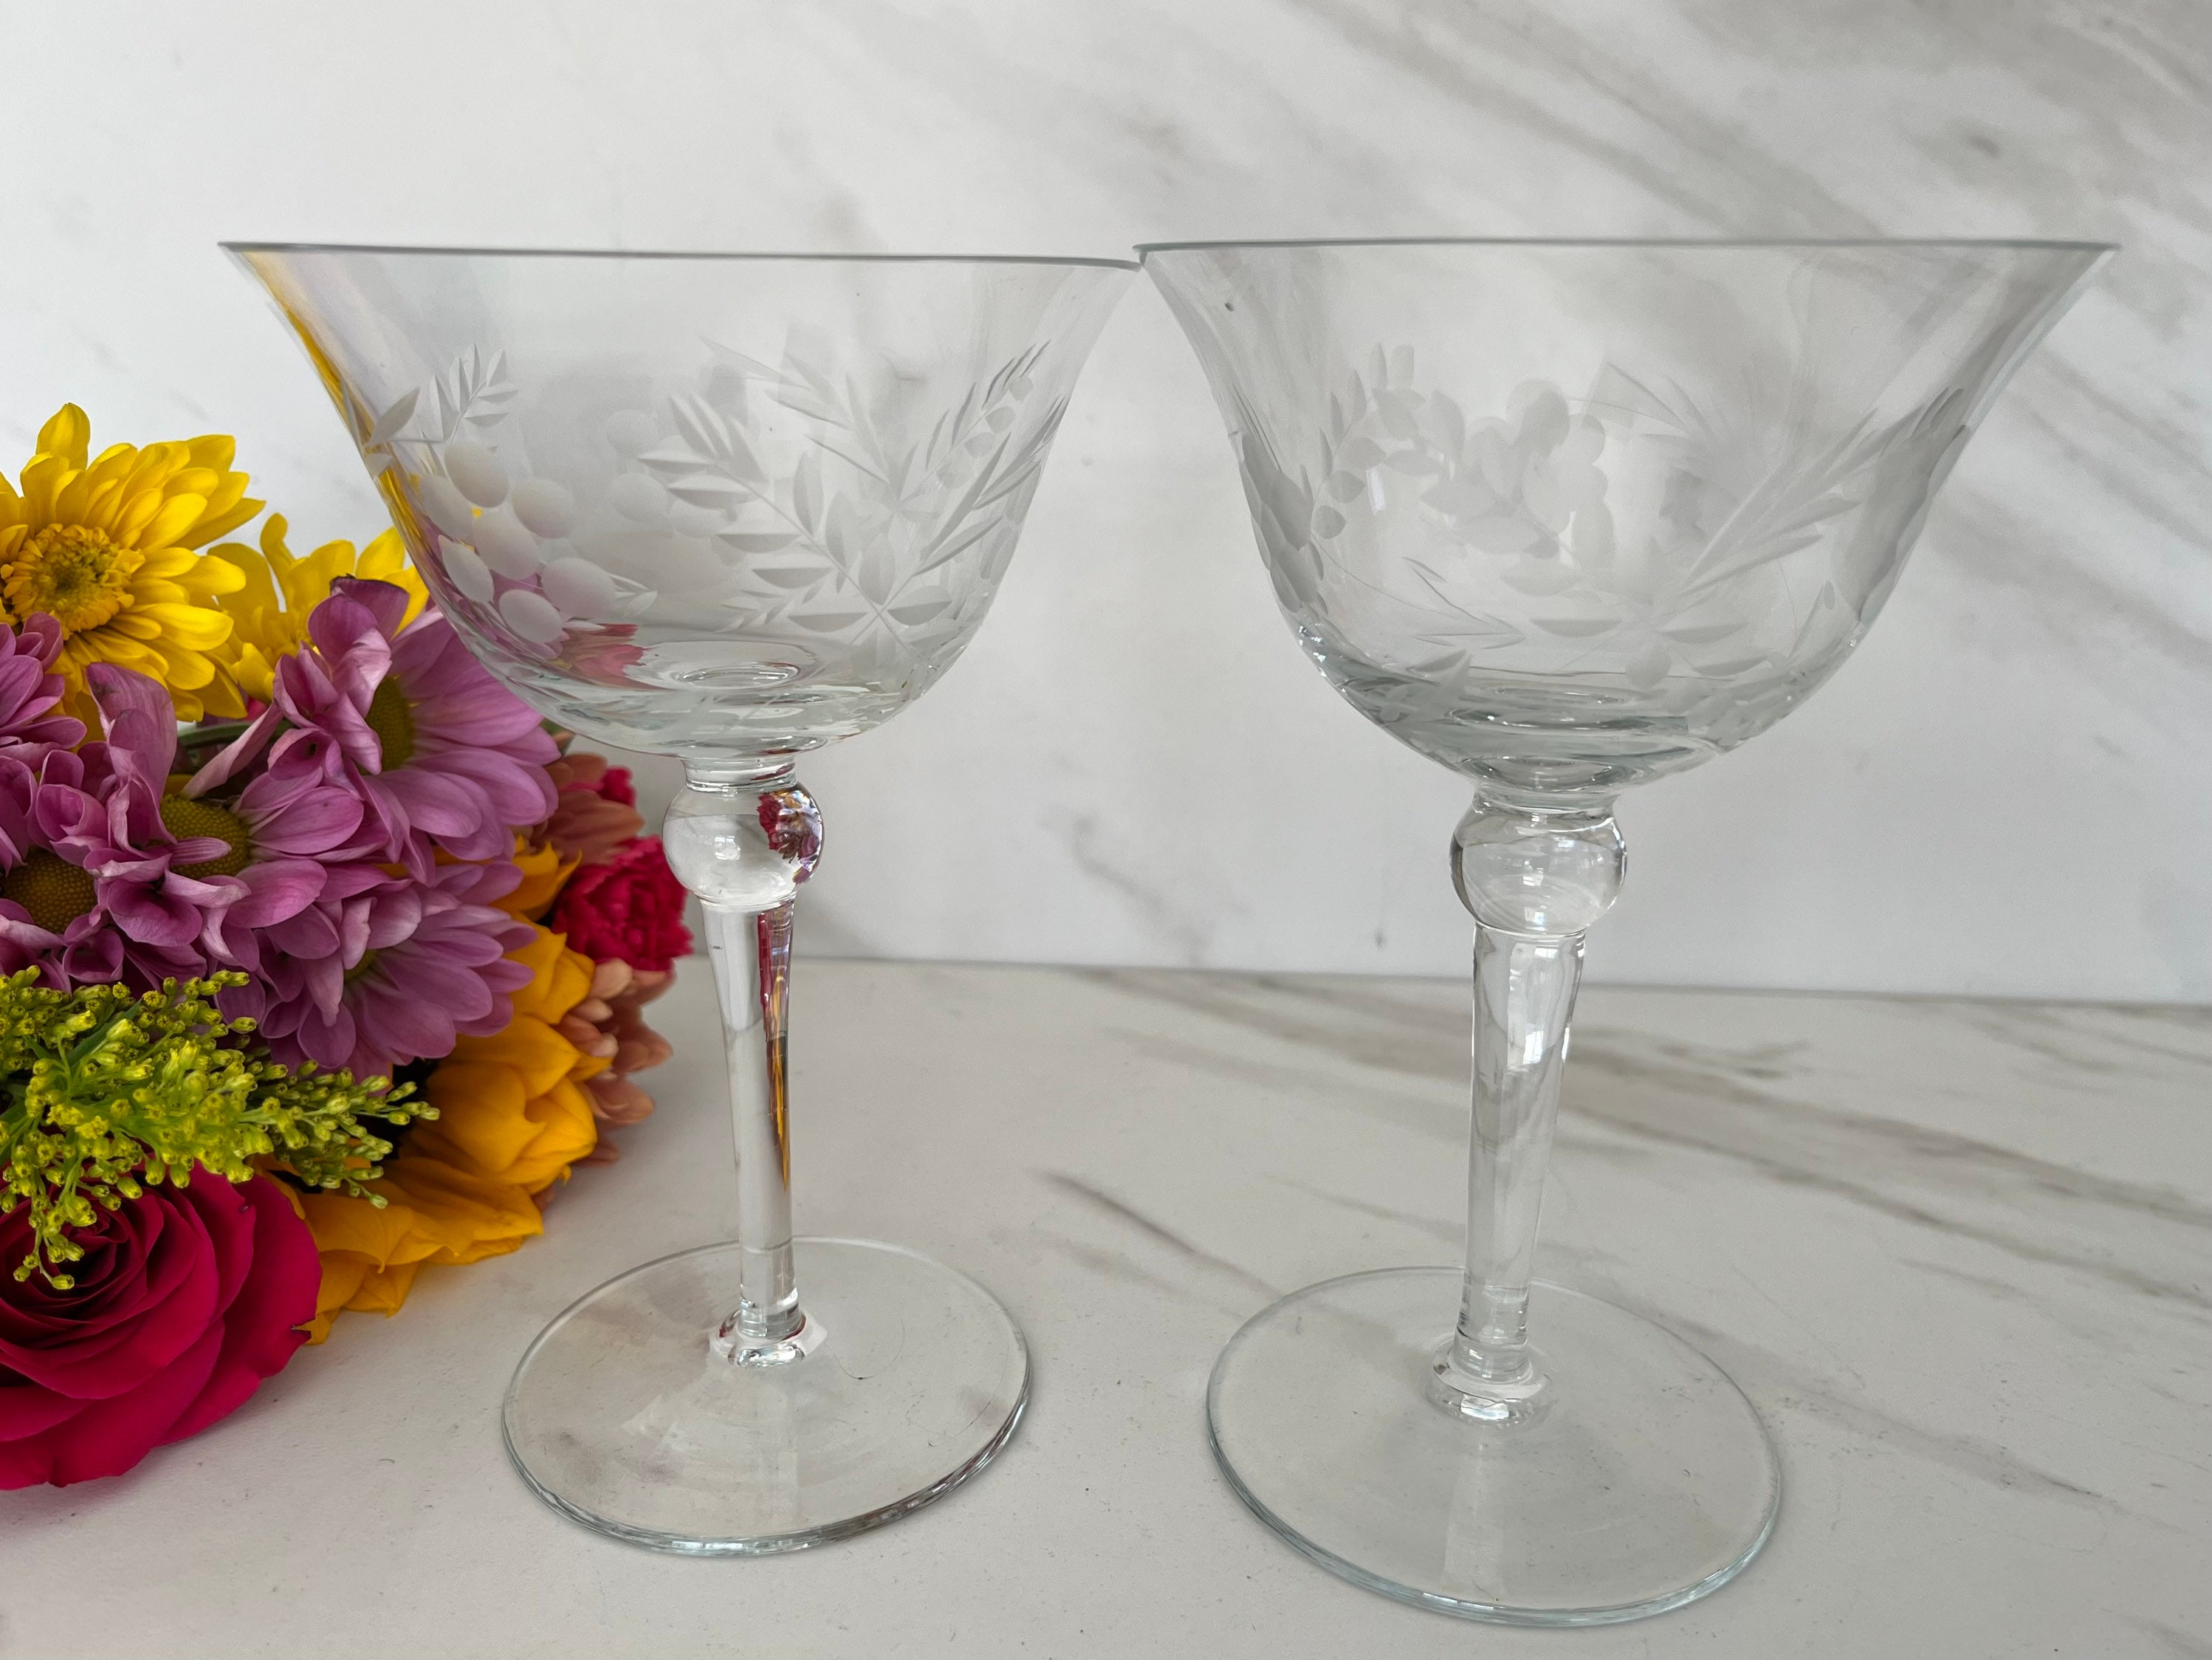 Set of 2 Etched Champagne Coupe Glasses Floral Wheat Dot Pattern 4 Ounce  4.5”